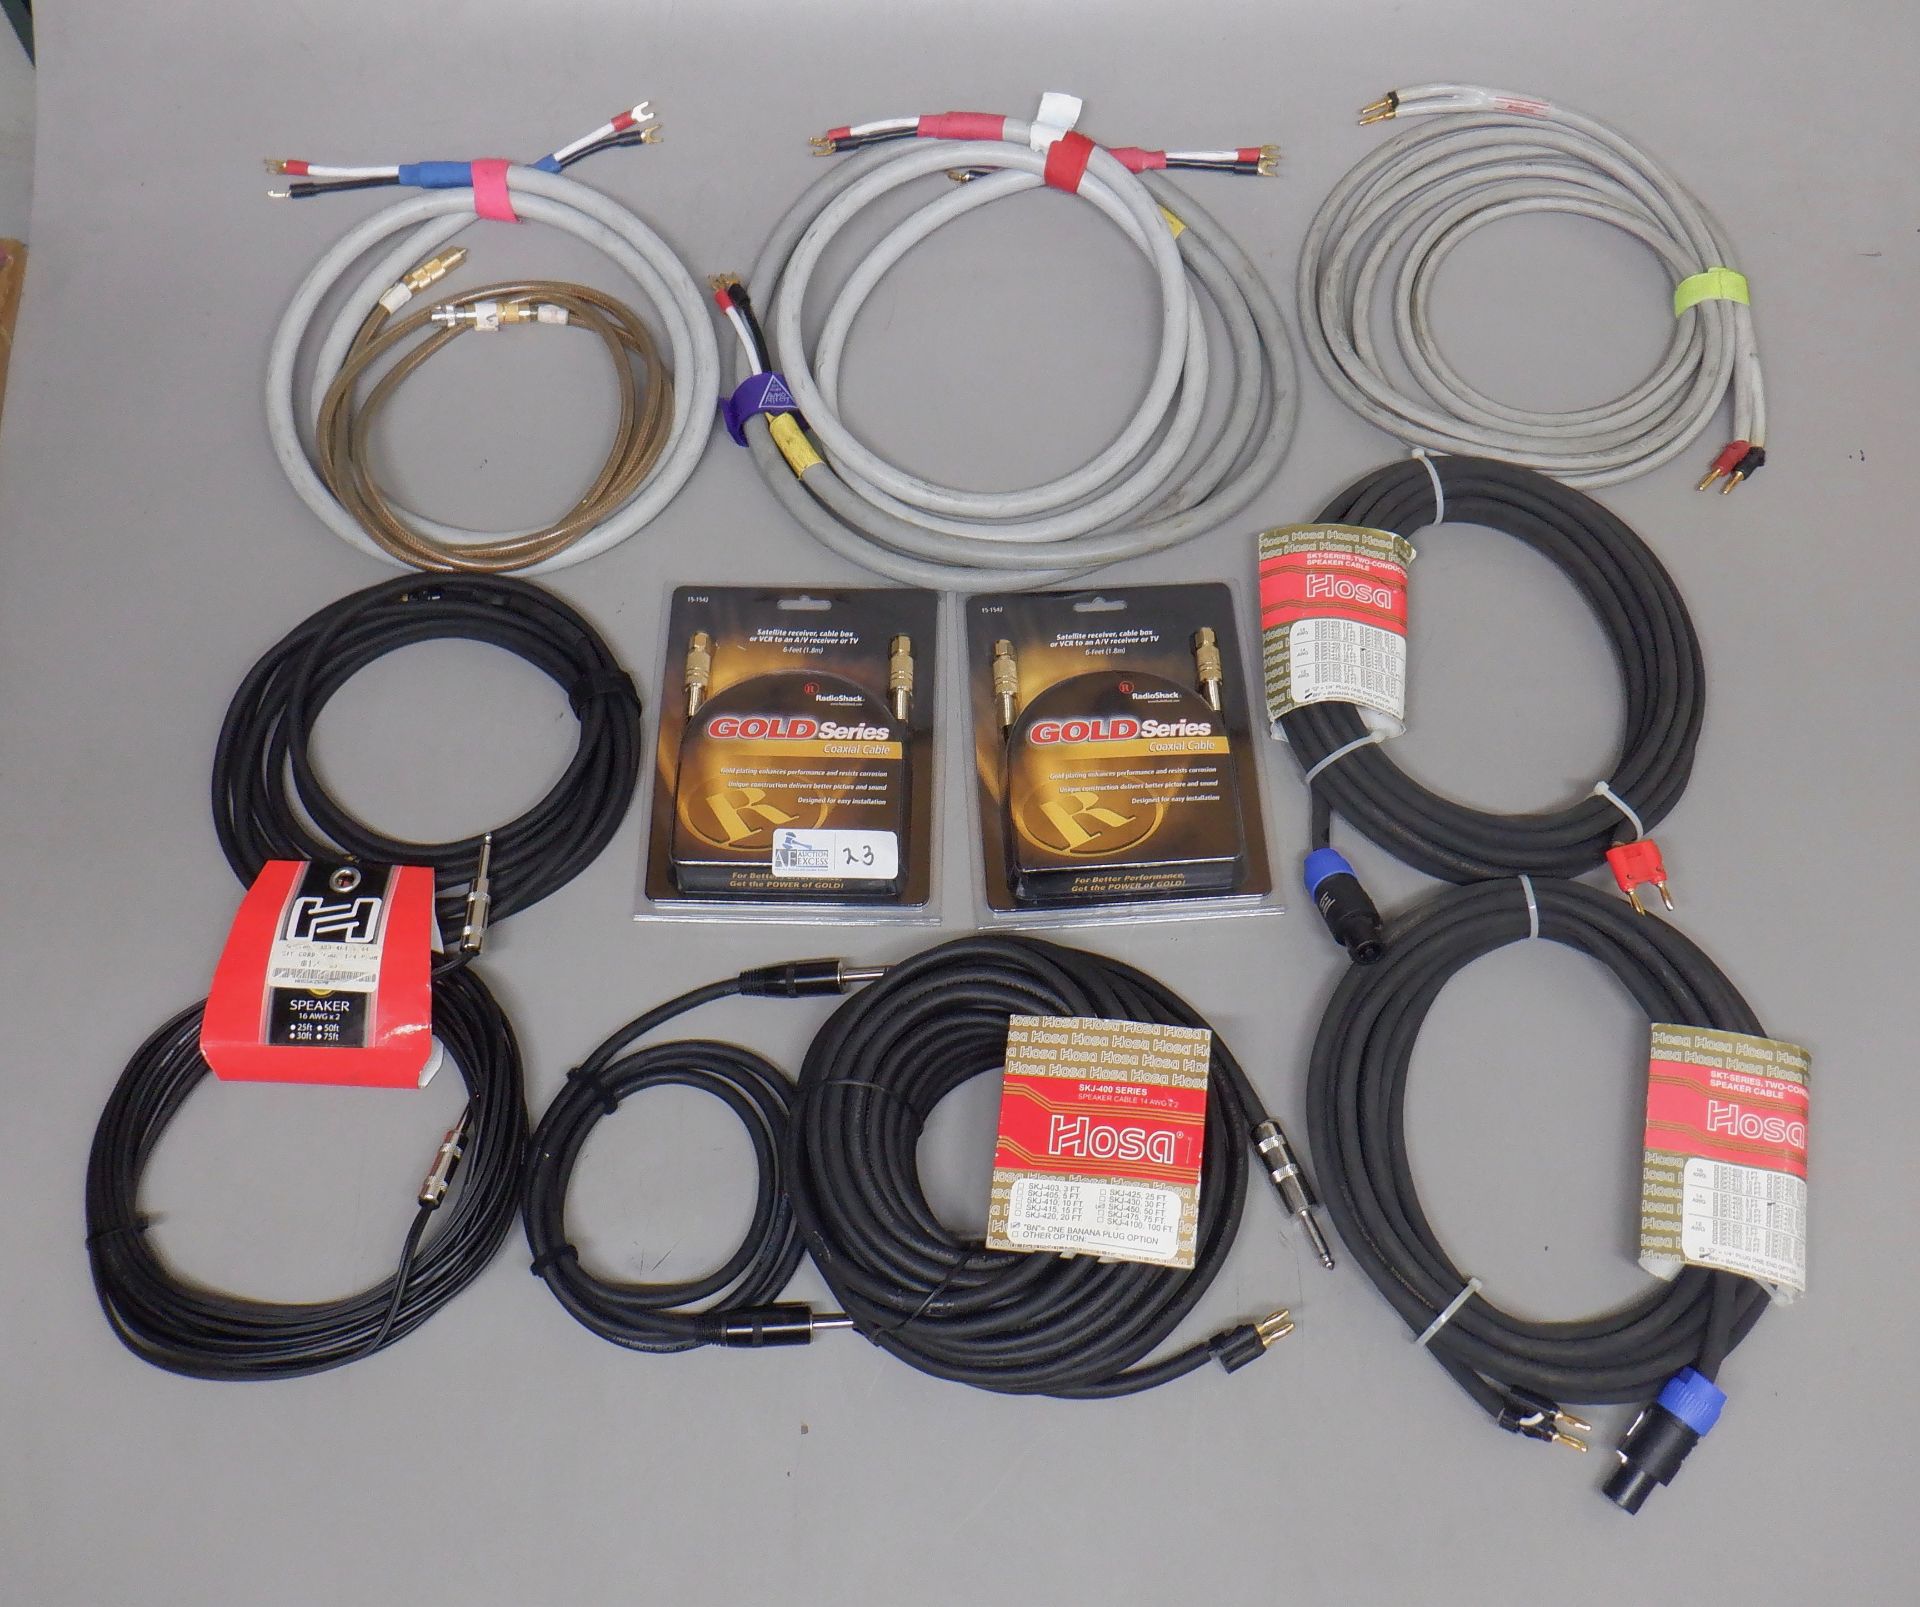 BOX SPEAKER CABLE AND MORE